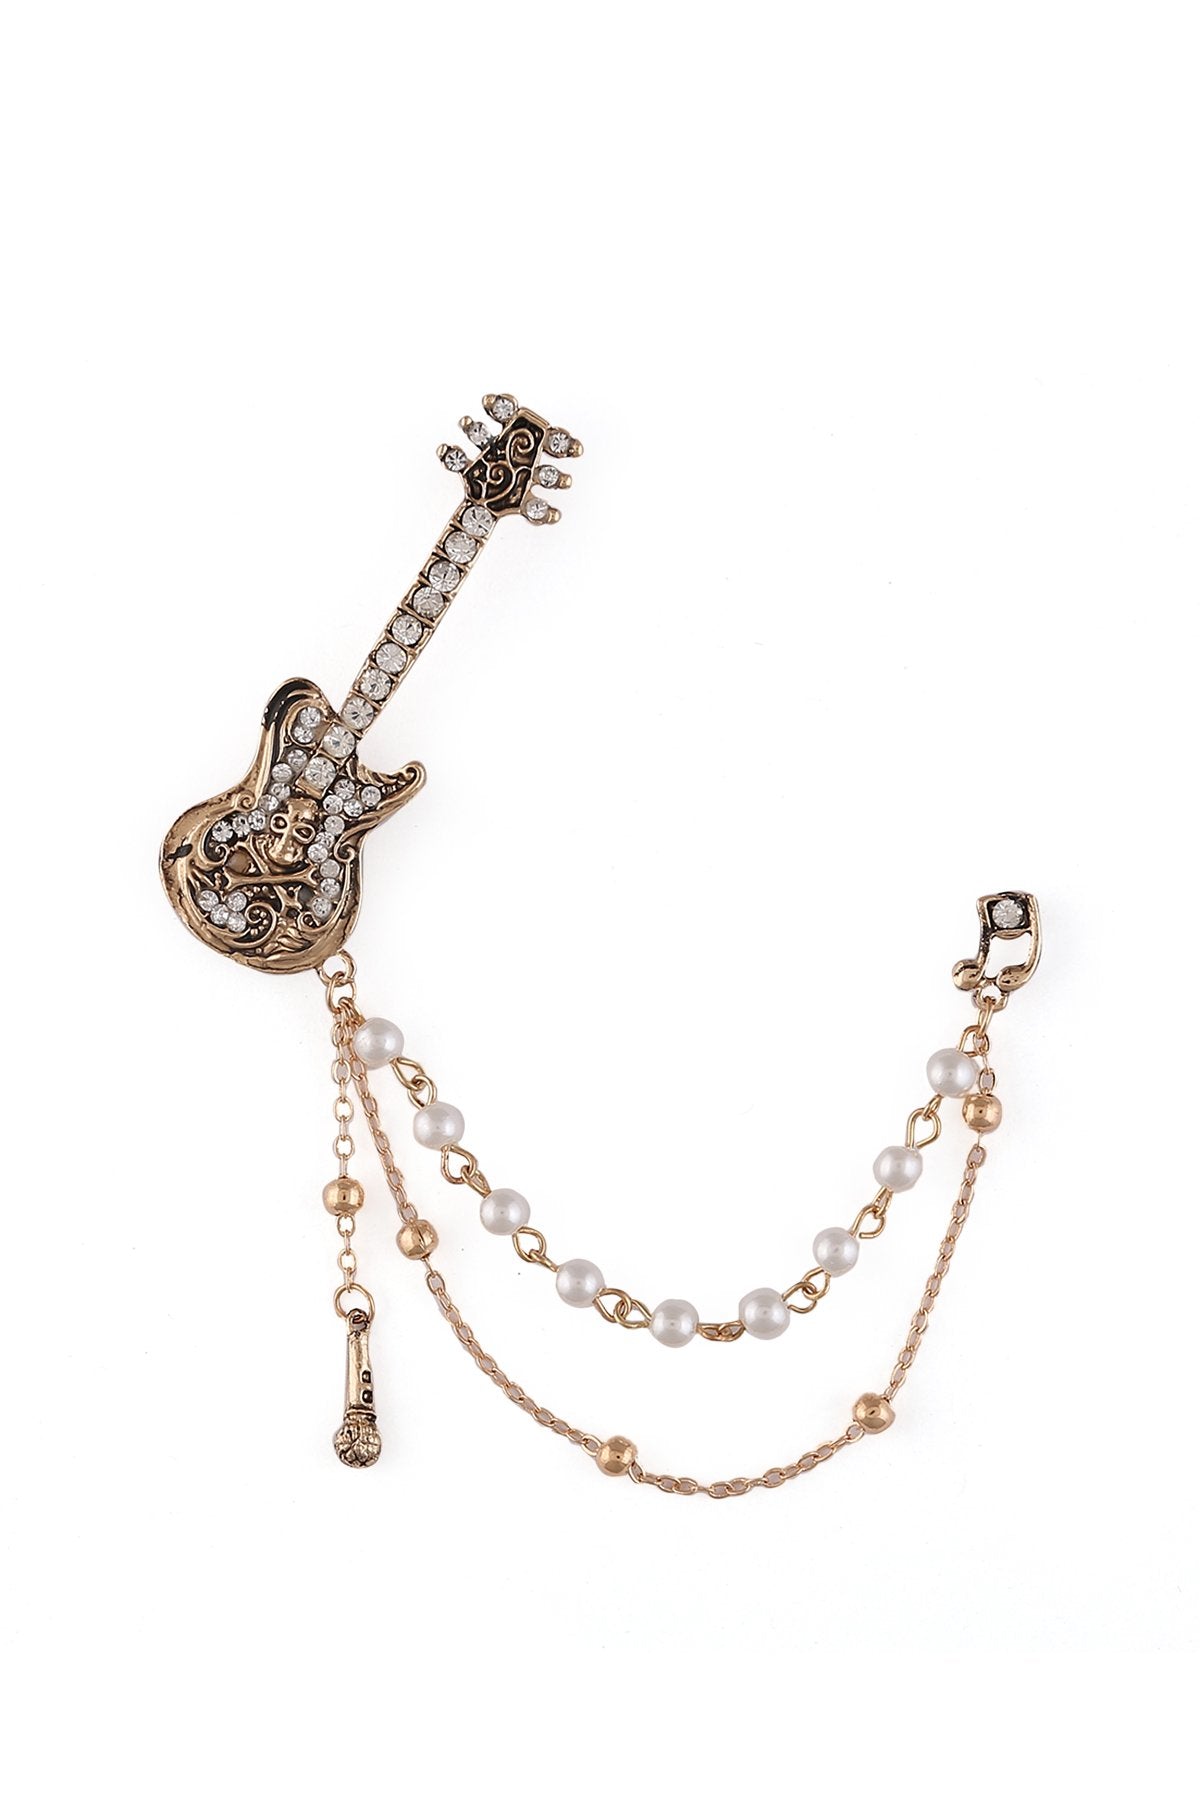 Classic Guitar Brooch with Pearl, Diamond & Chain for Music Lovers